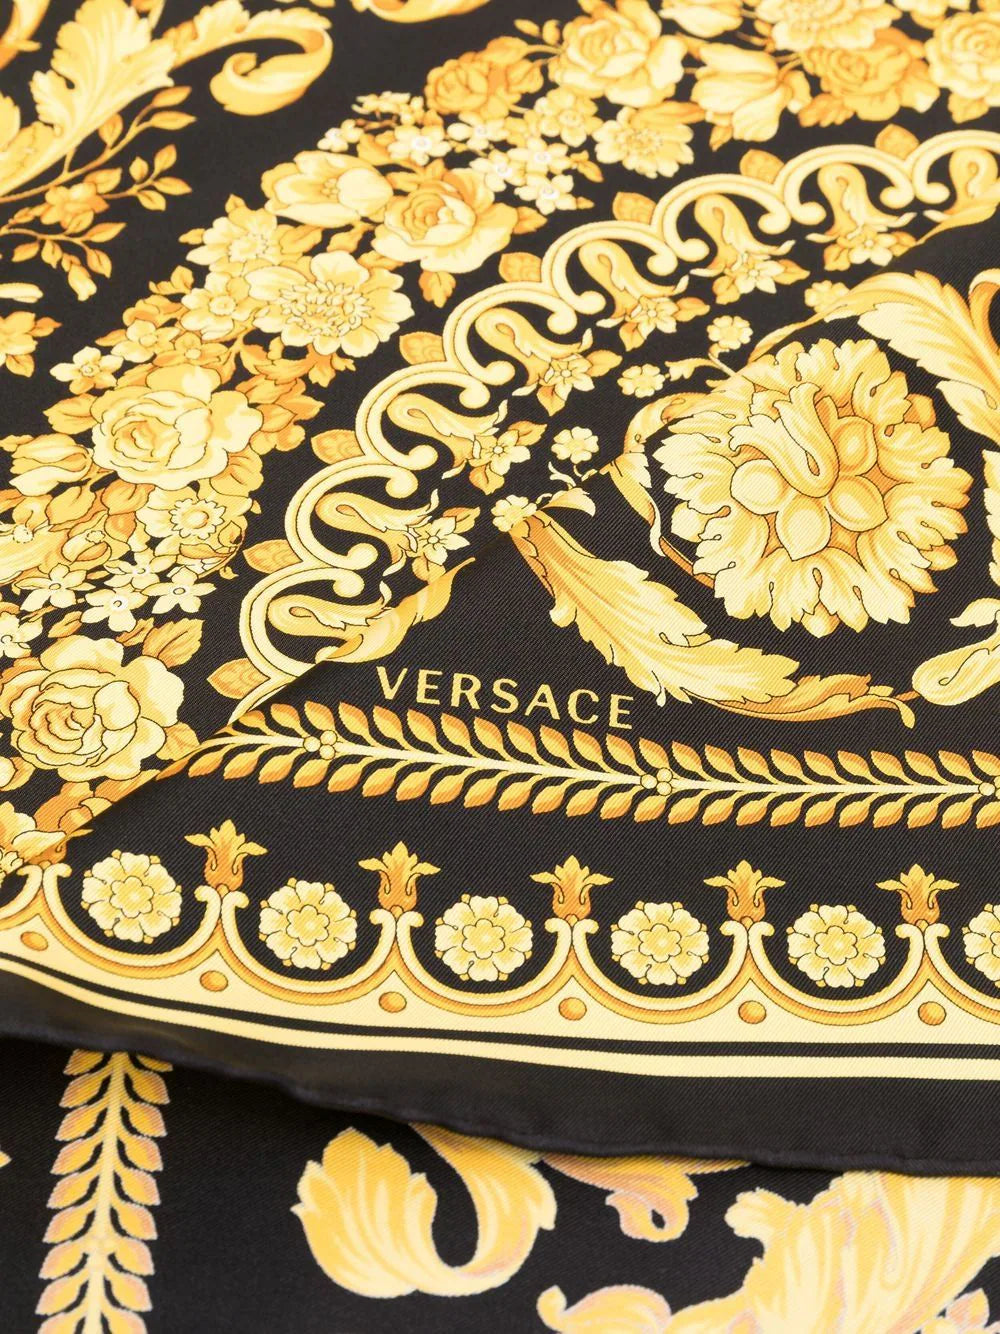 Versace Black and Gold Baroque Silk Scarf